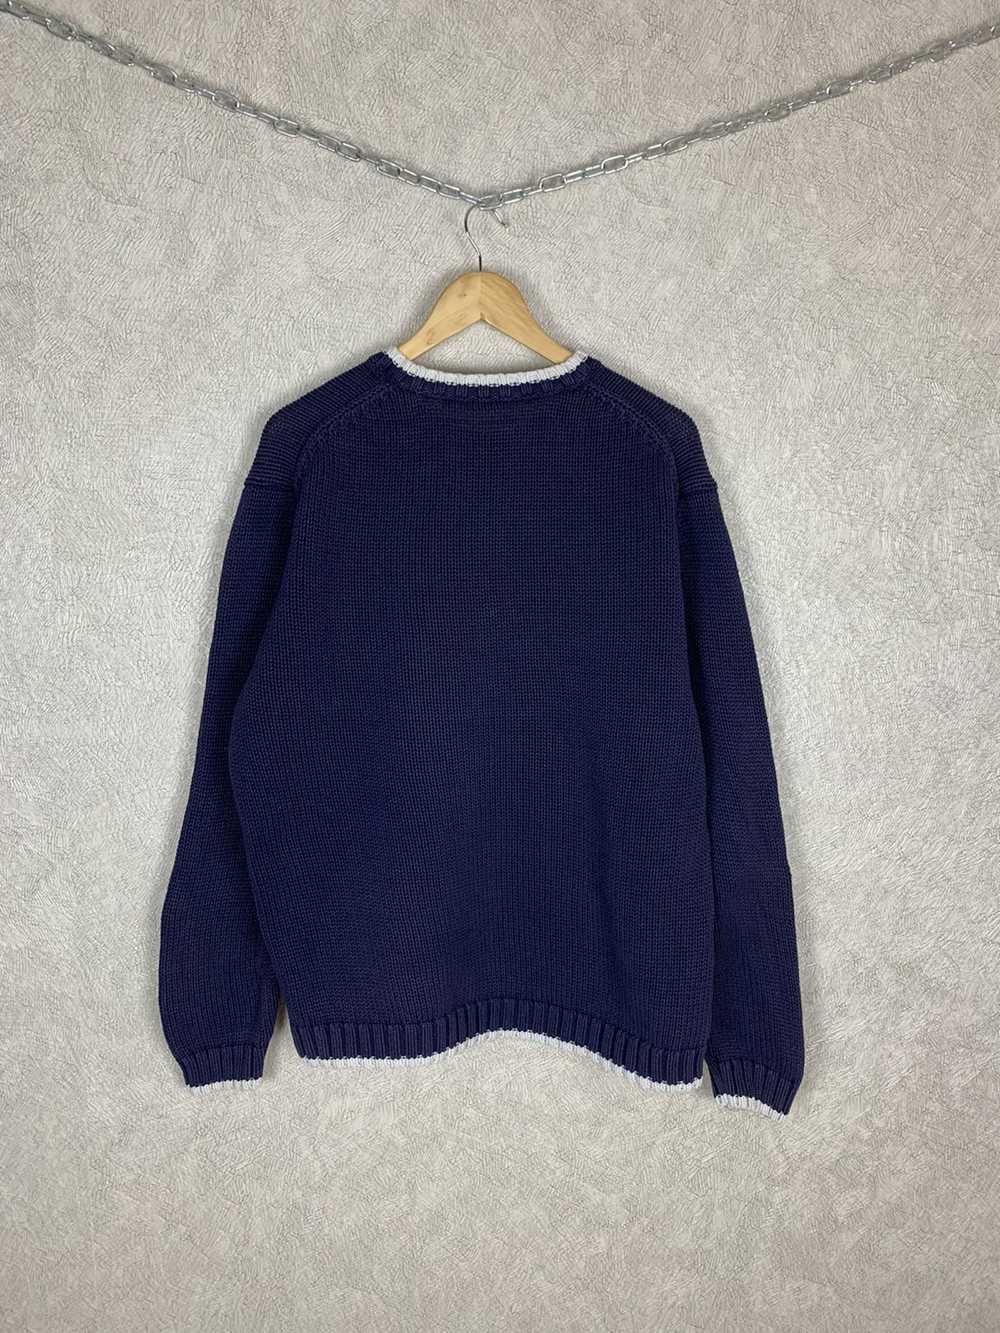 Yves Saint Laurent 💥YSL HEAVY KNIT SWEATER EMBRO… - image 3